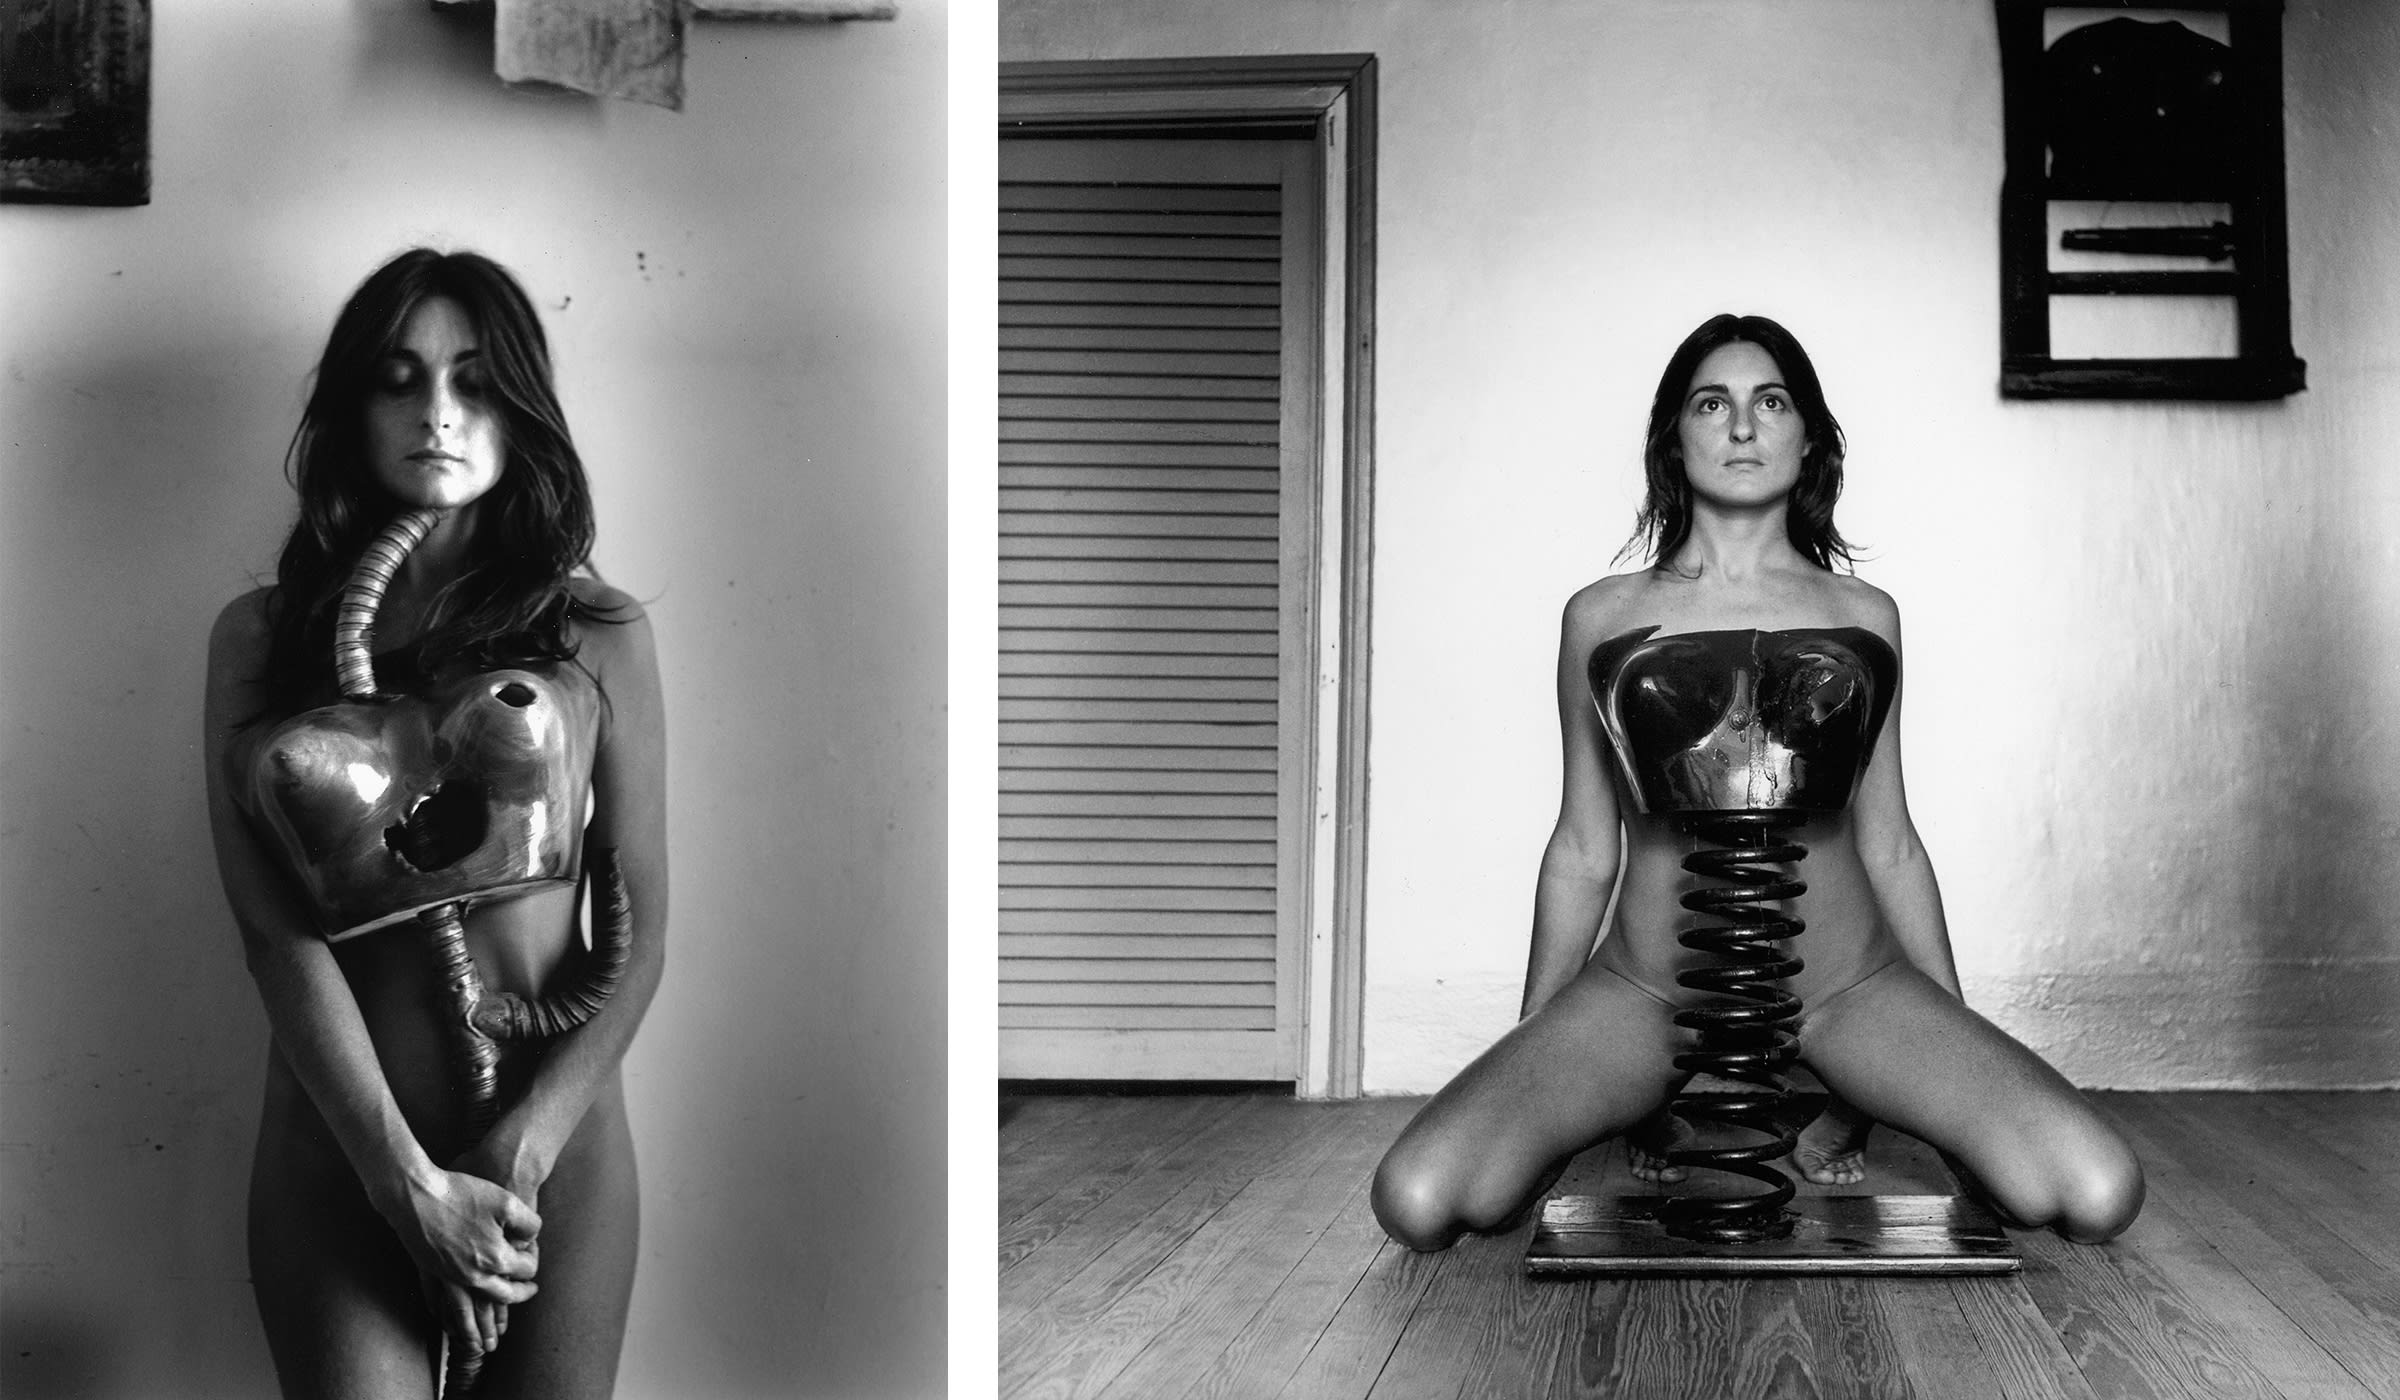 Liliana Maresca, Sin titulo. Photographs by Marcos López, 1983. Courtesy of Rolf Art.